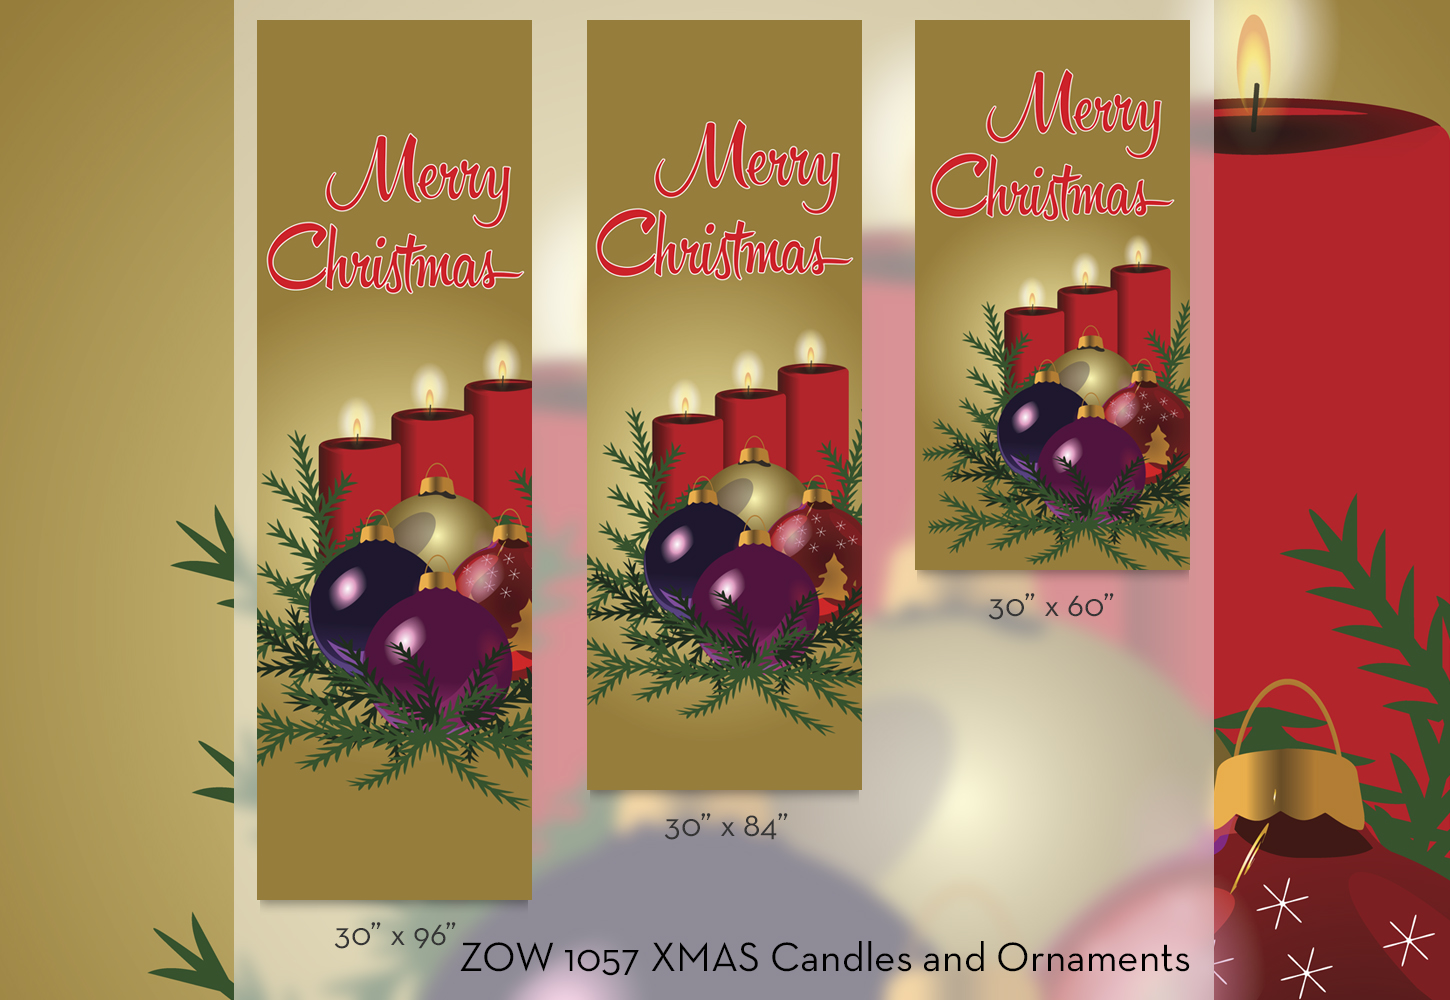 ZOW 1057 XMAS Candles and Ornaments